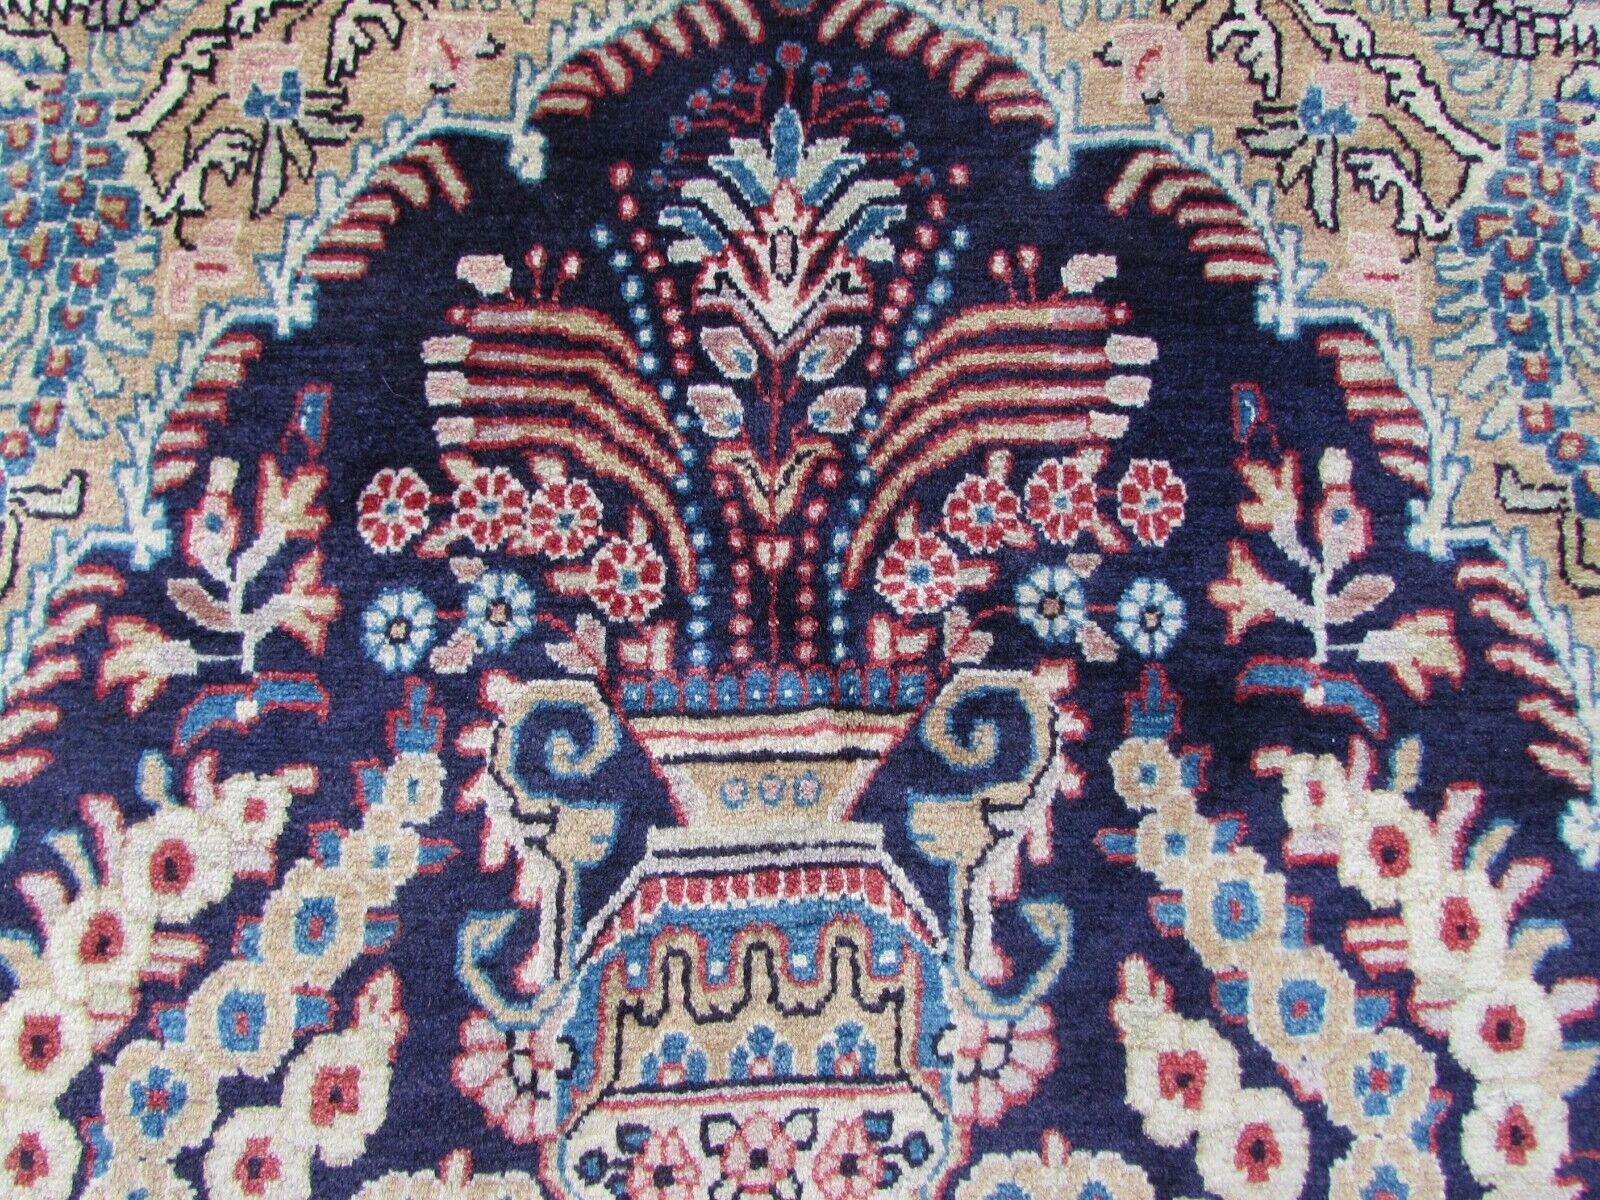 Handmade vintage Persian Kashan rug in prayer design with birds and flowers. The rug is from the end of 20th century in original good condition.